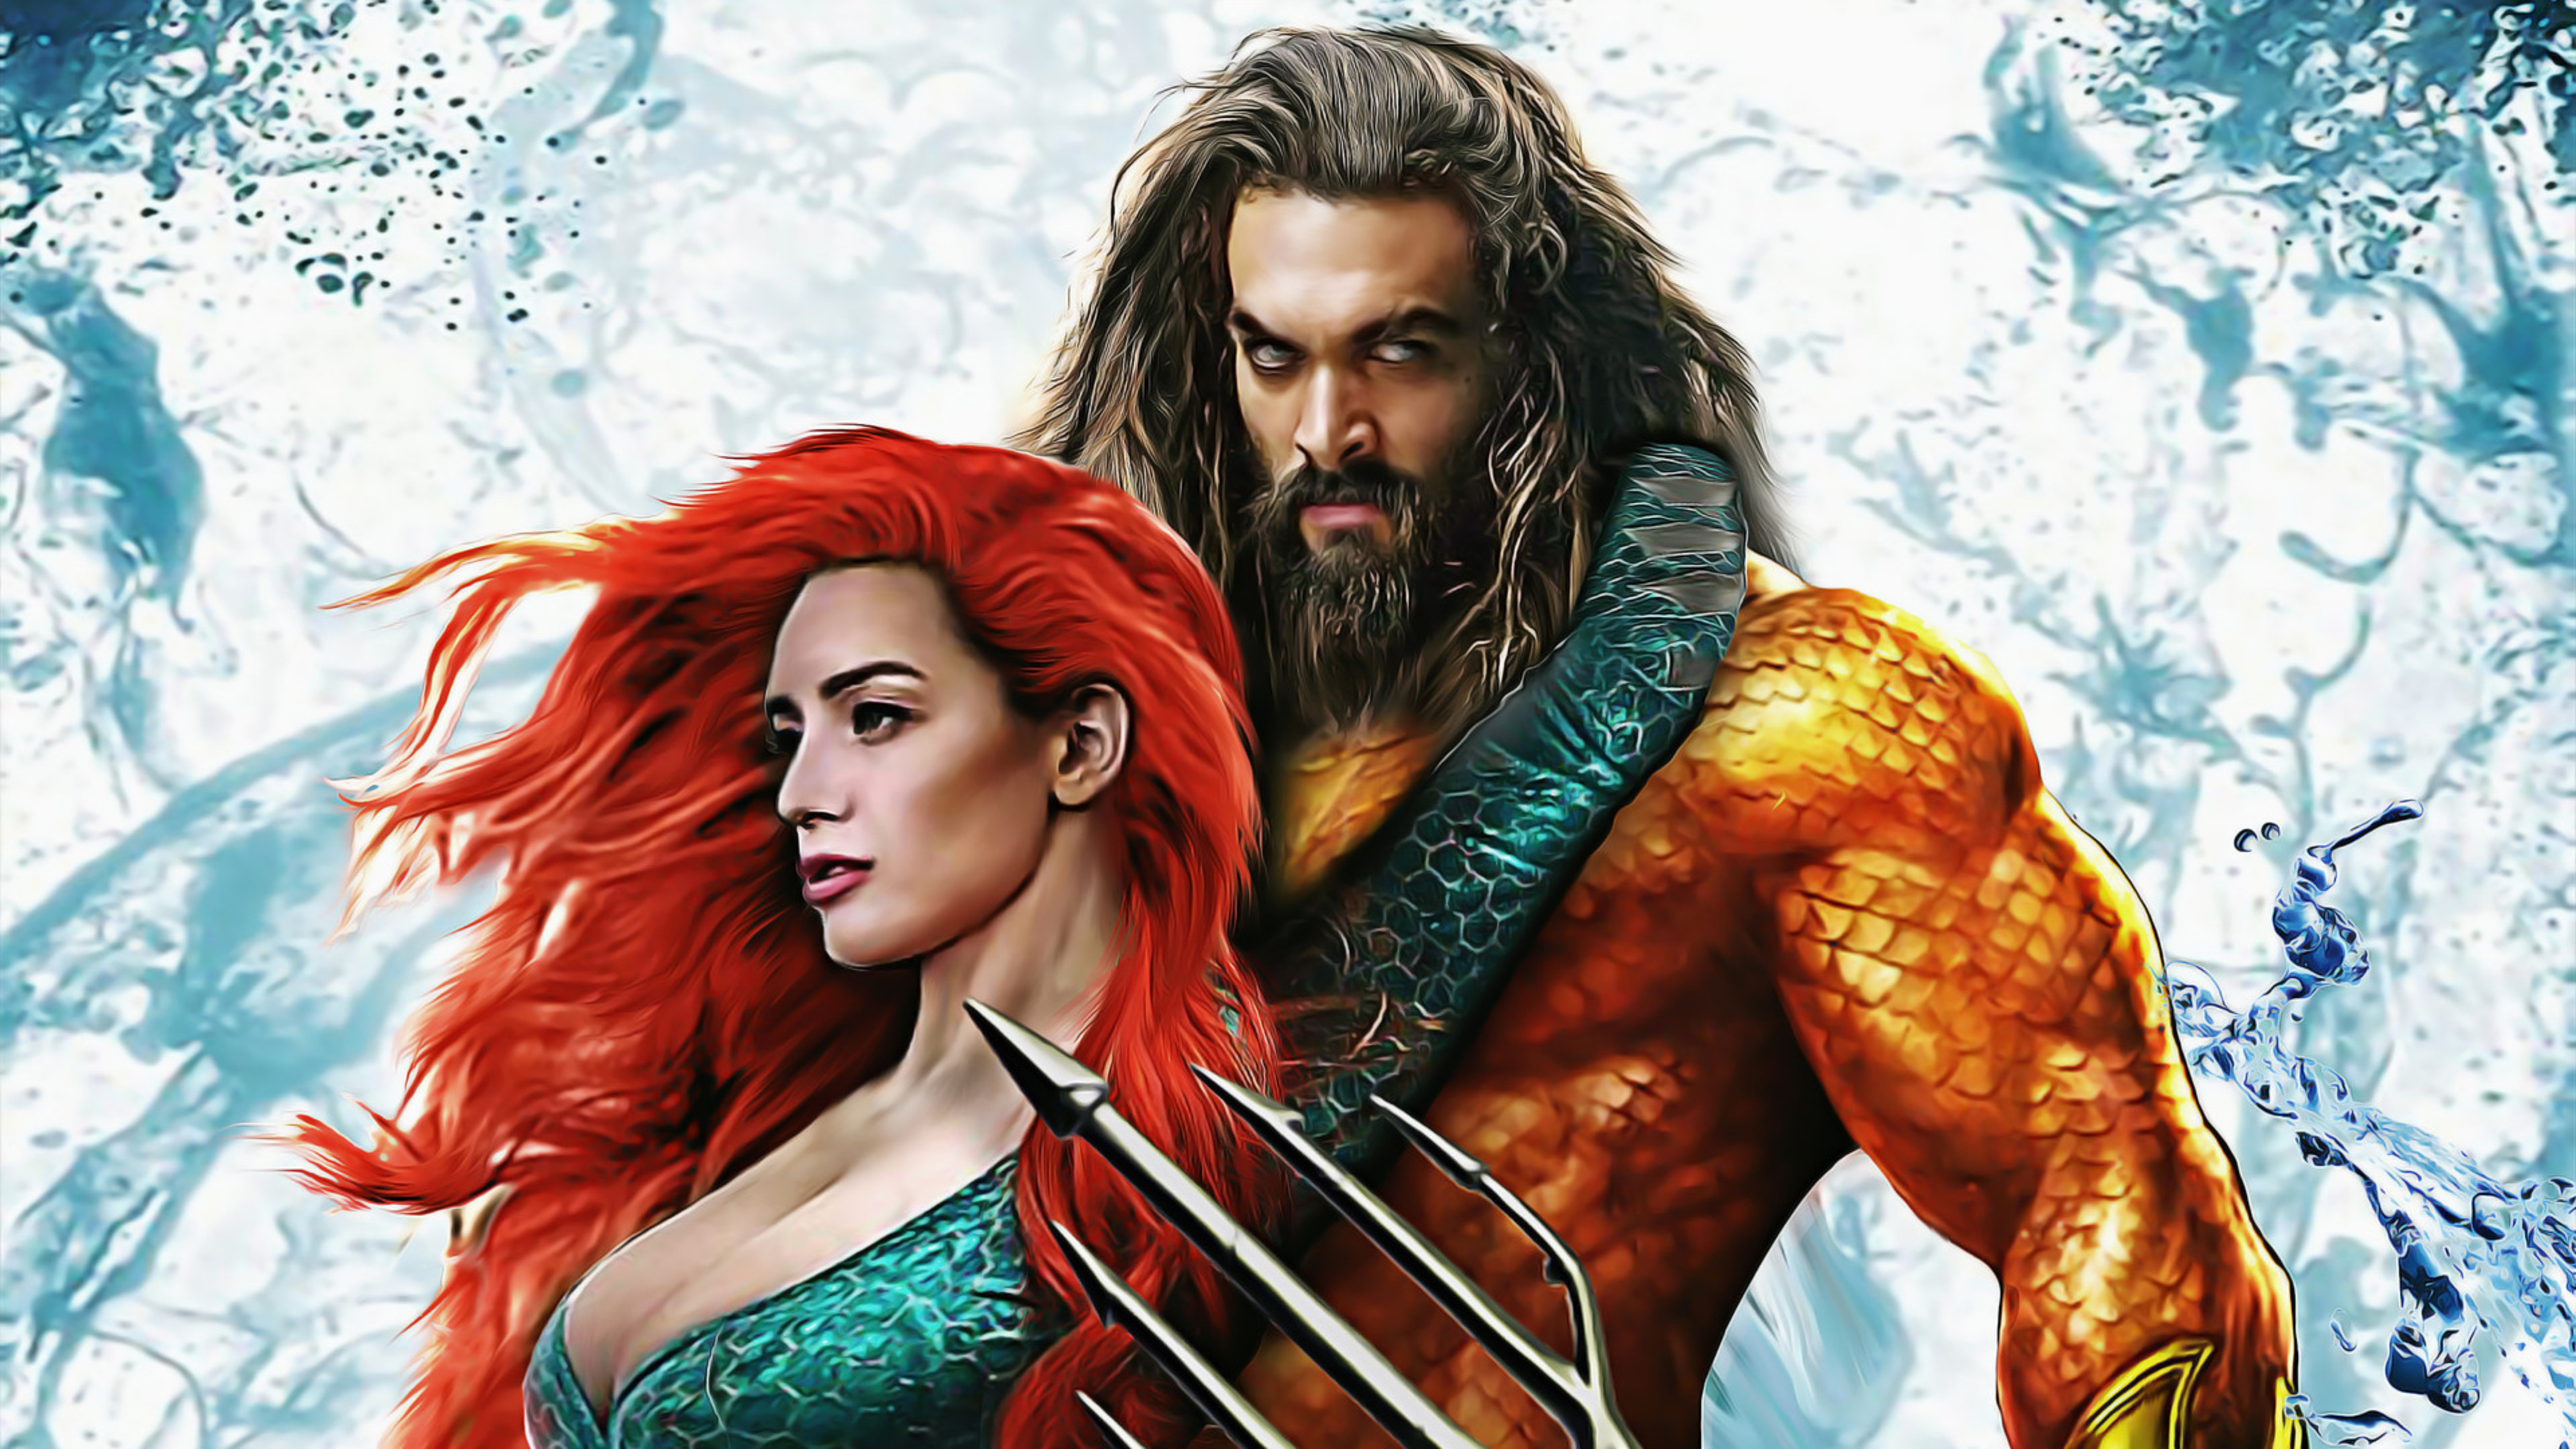 Blonde Hair Could Indicate New Love Interest for Aquaman in Sequel - wide 8